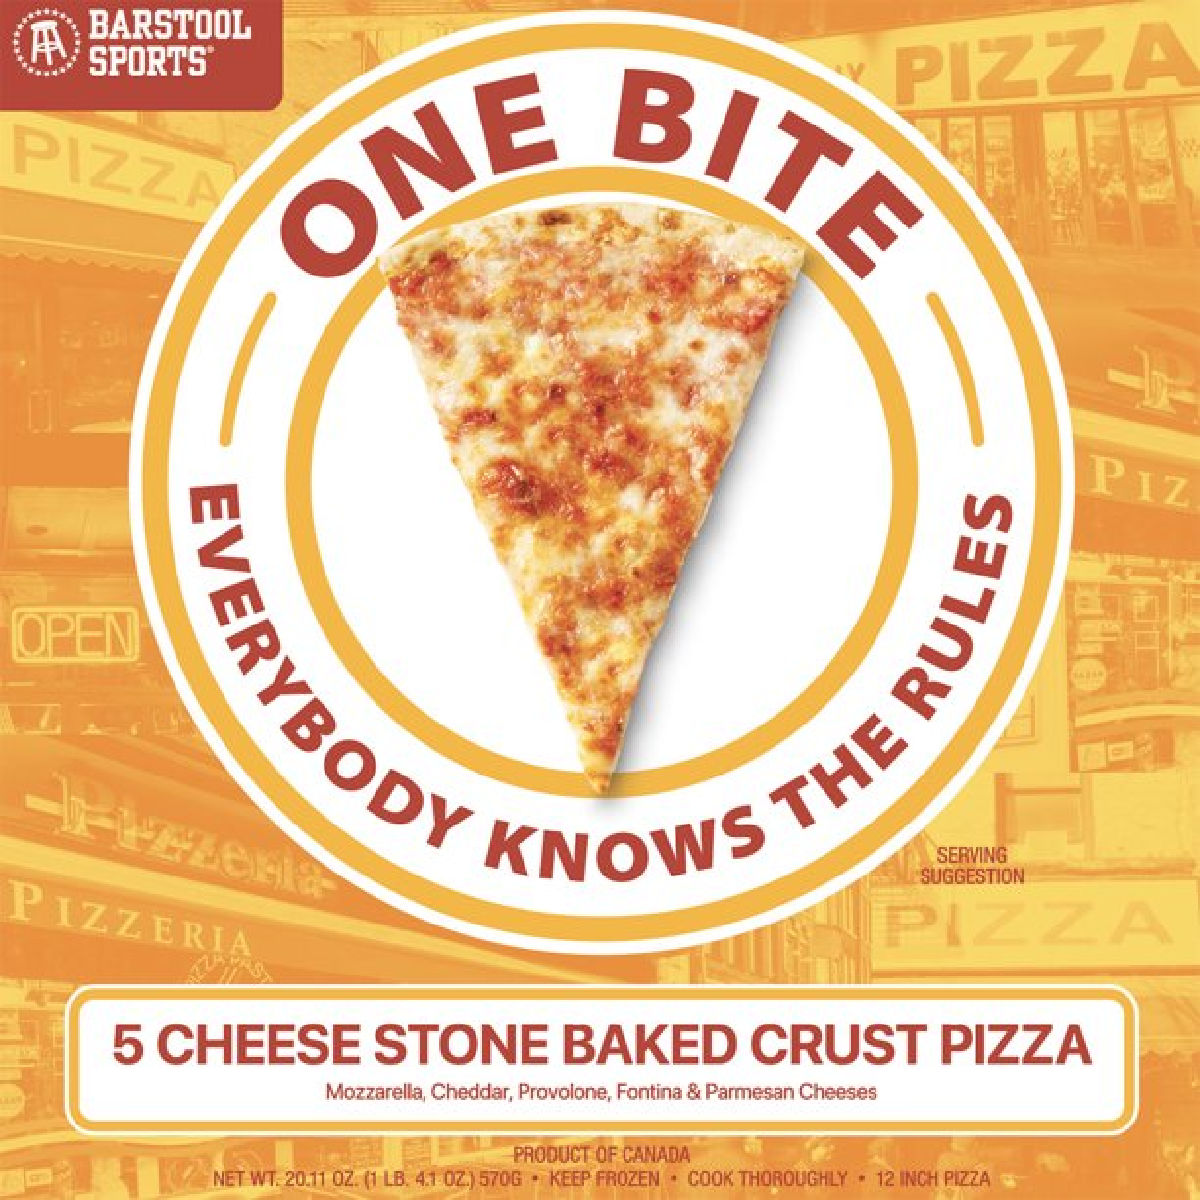 Barstool Sports One Bite 5 Cheese Frozen Pizza